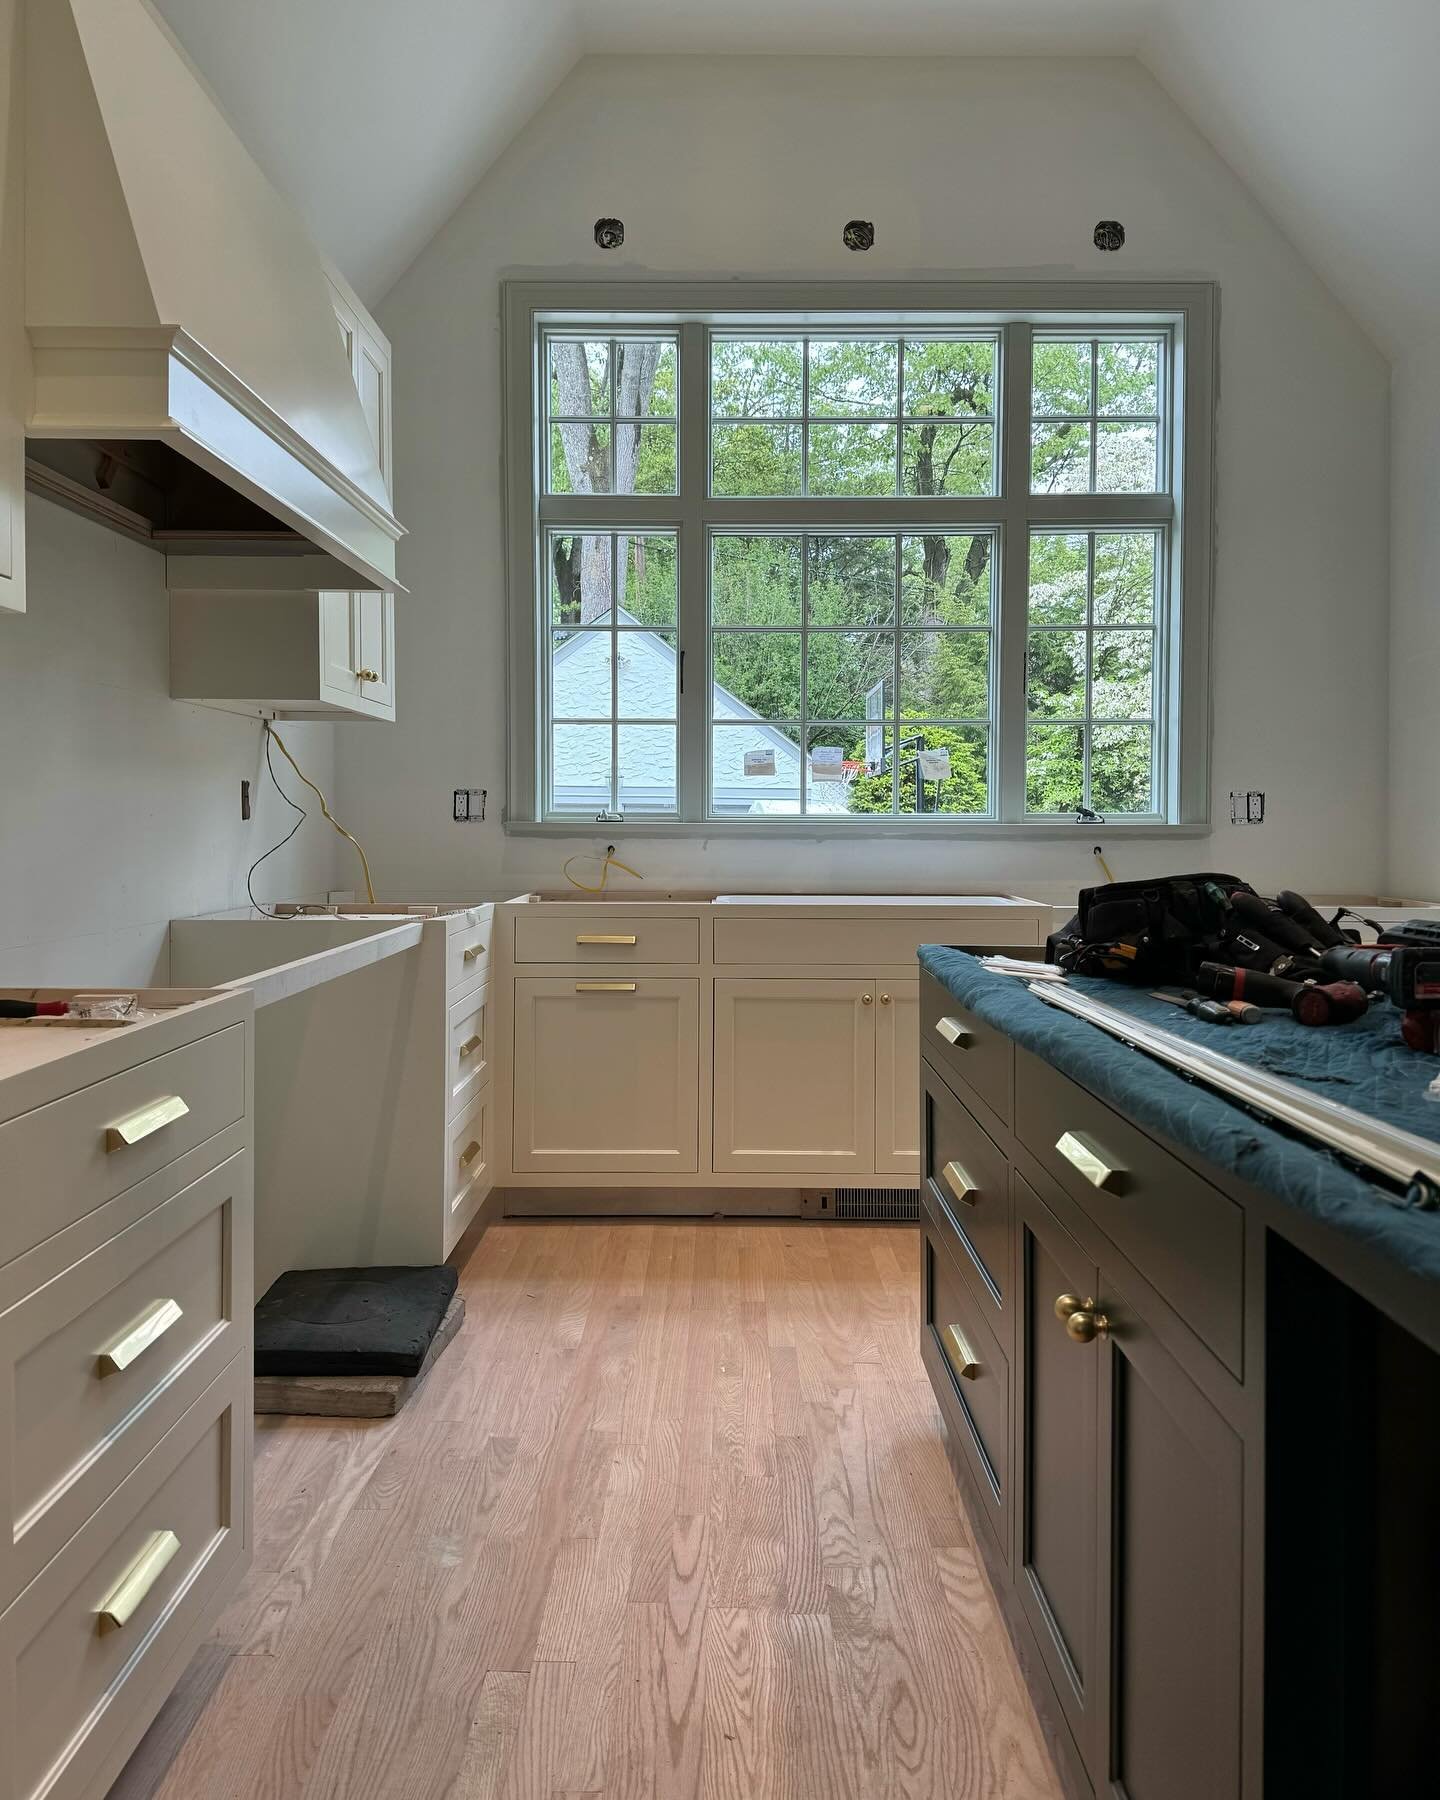 Progress on the kitchen in our Ridgewood renovation project. Swipe for where we started. A prior addition with a different roofline created two distinct and awkward areas in the kitchen. We moved the working part of the kitchen toward the back of the